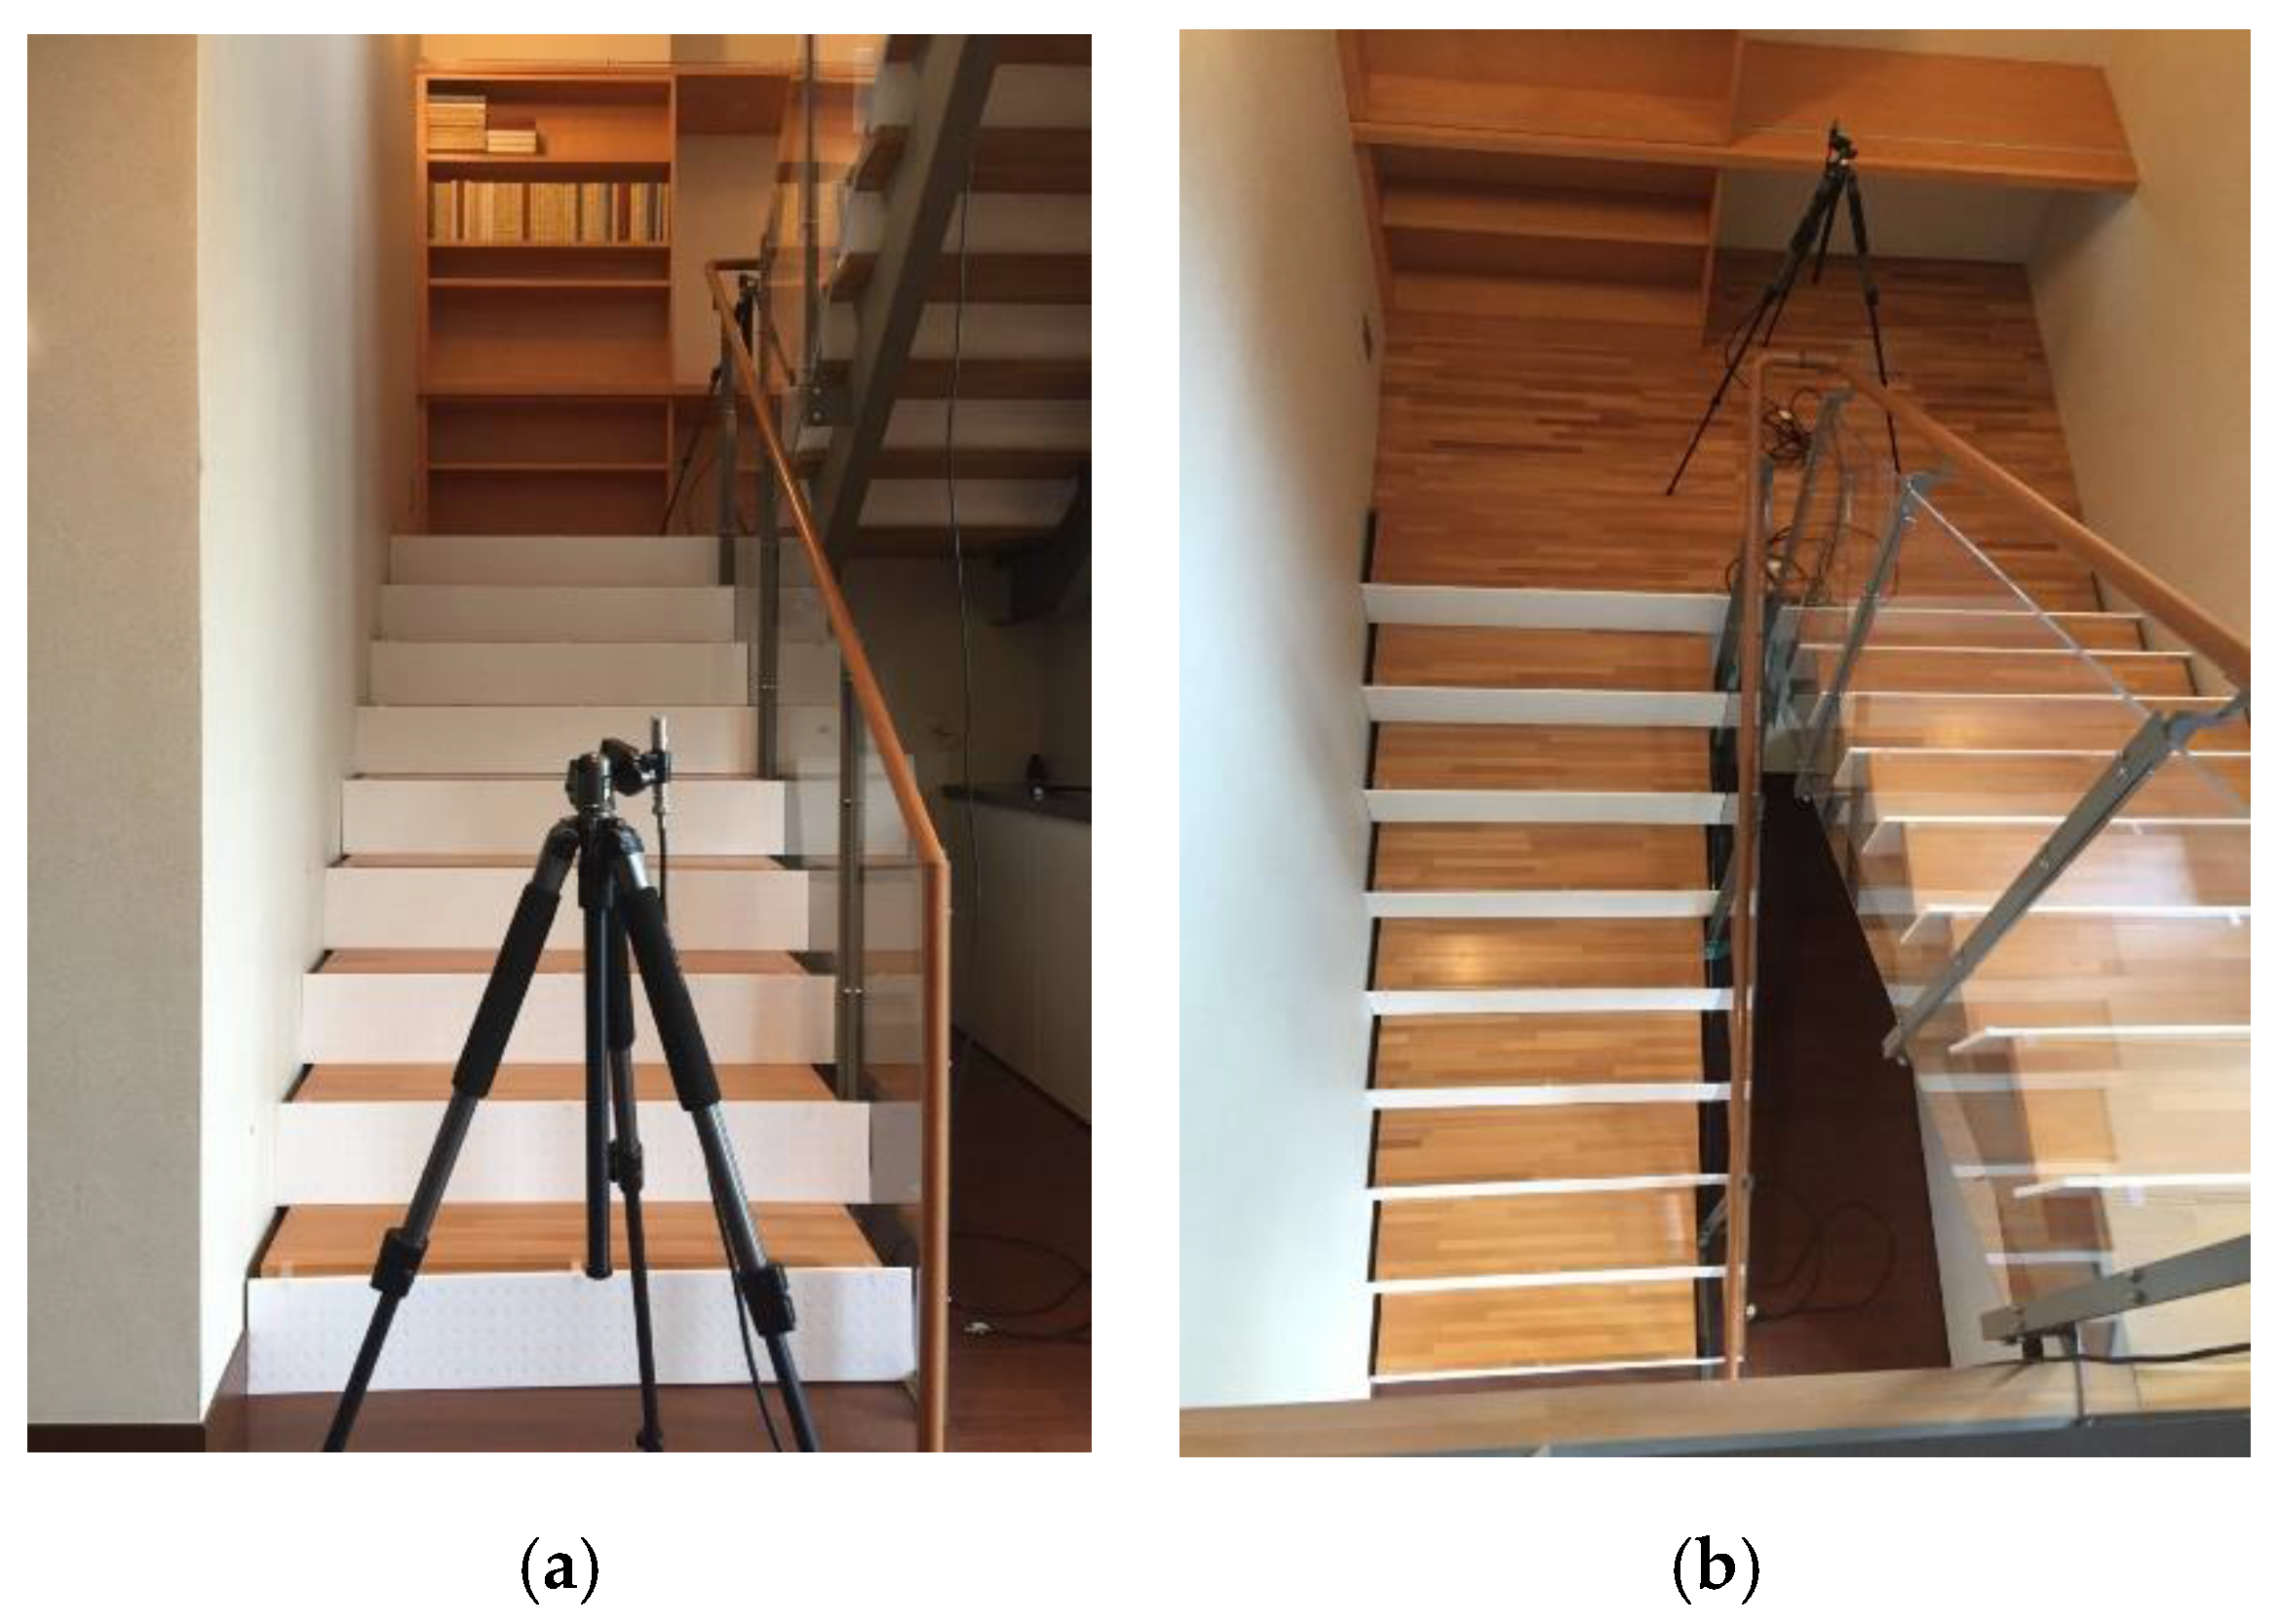 Buildings | Free Full-Text | Experimental Study on Use of Sound Absorption  Treatment for Reduction of Environmental Sound Propagation and  Reverberation in Staircases: A Case Study in Housing | HTML